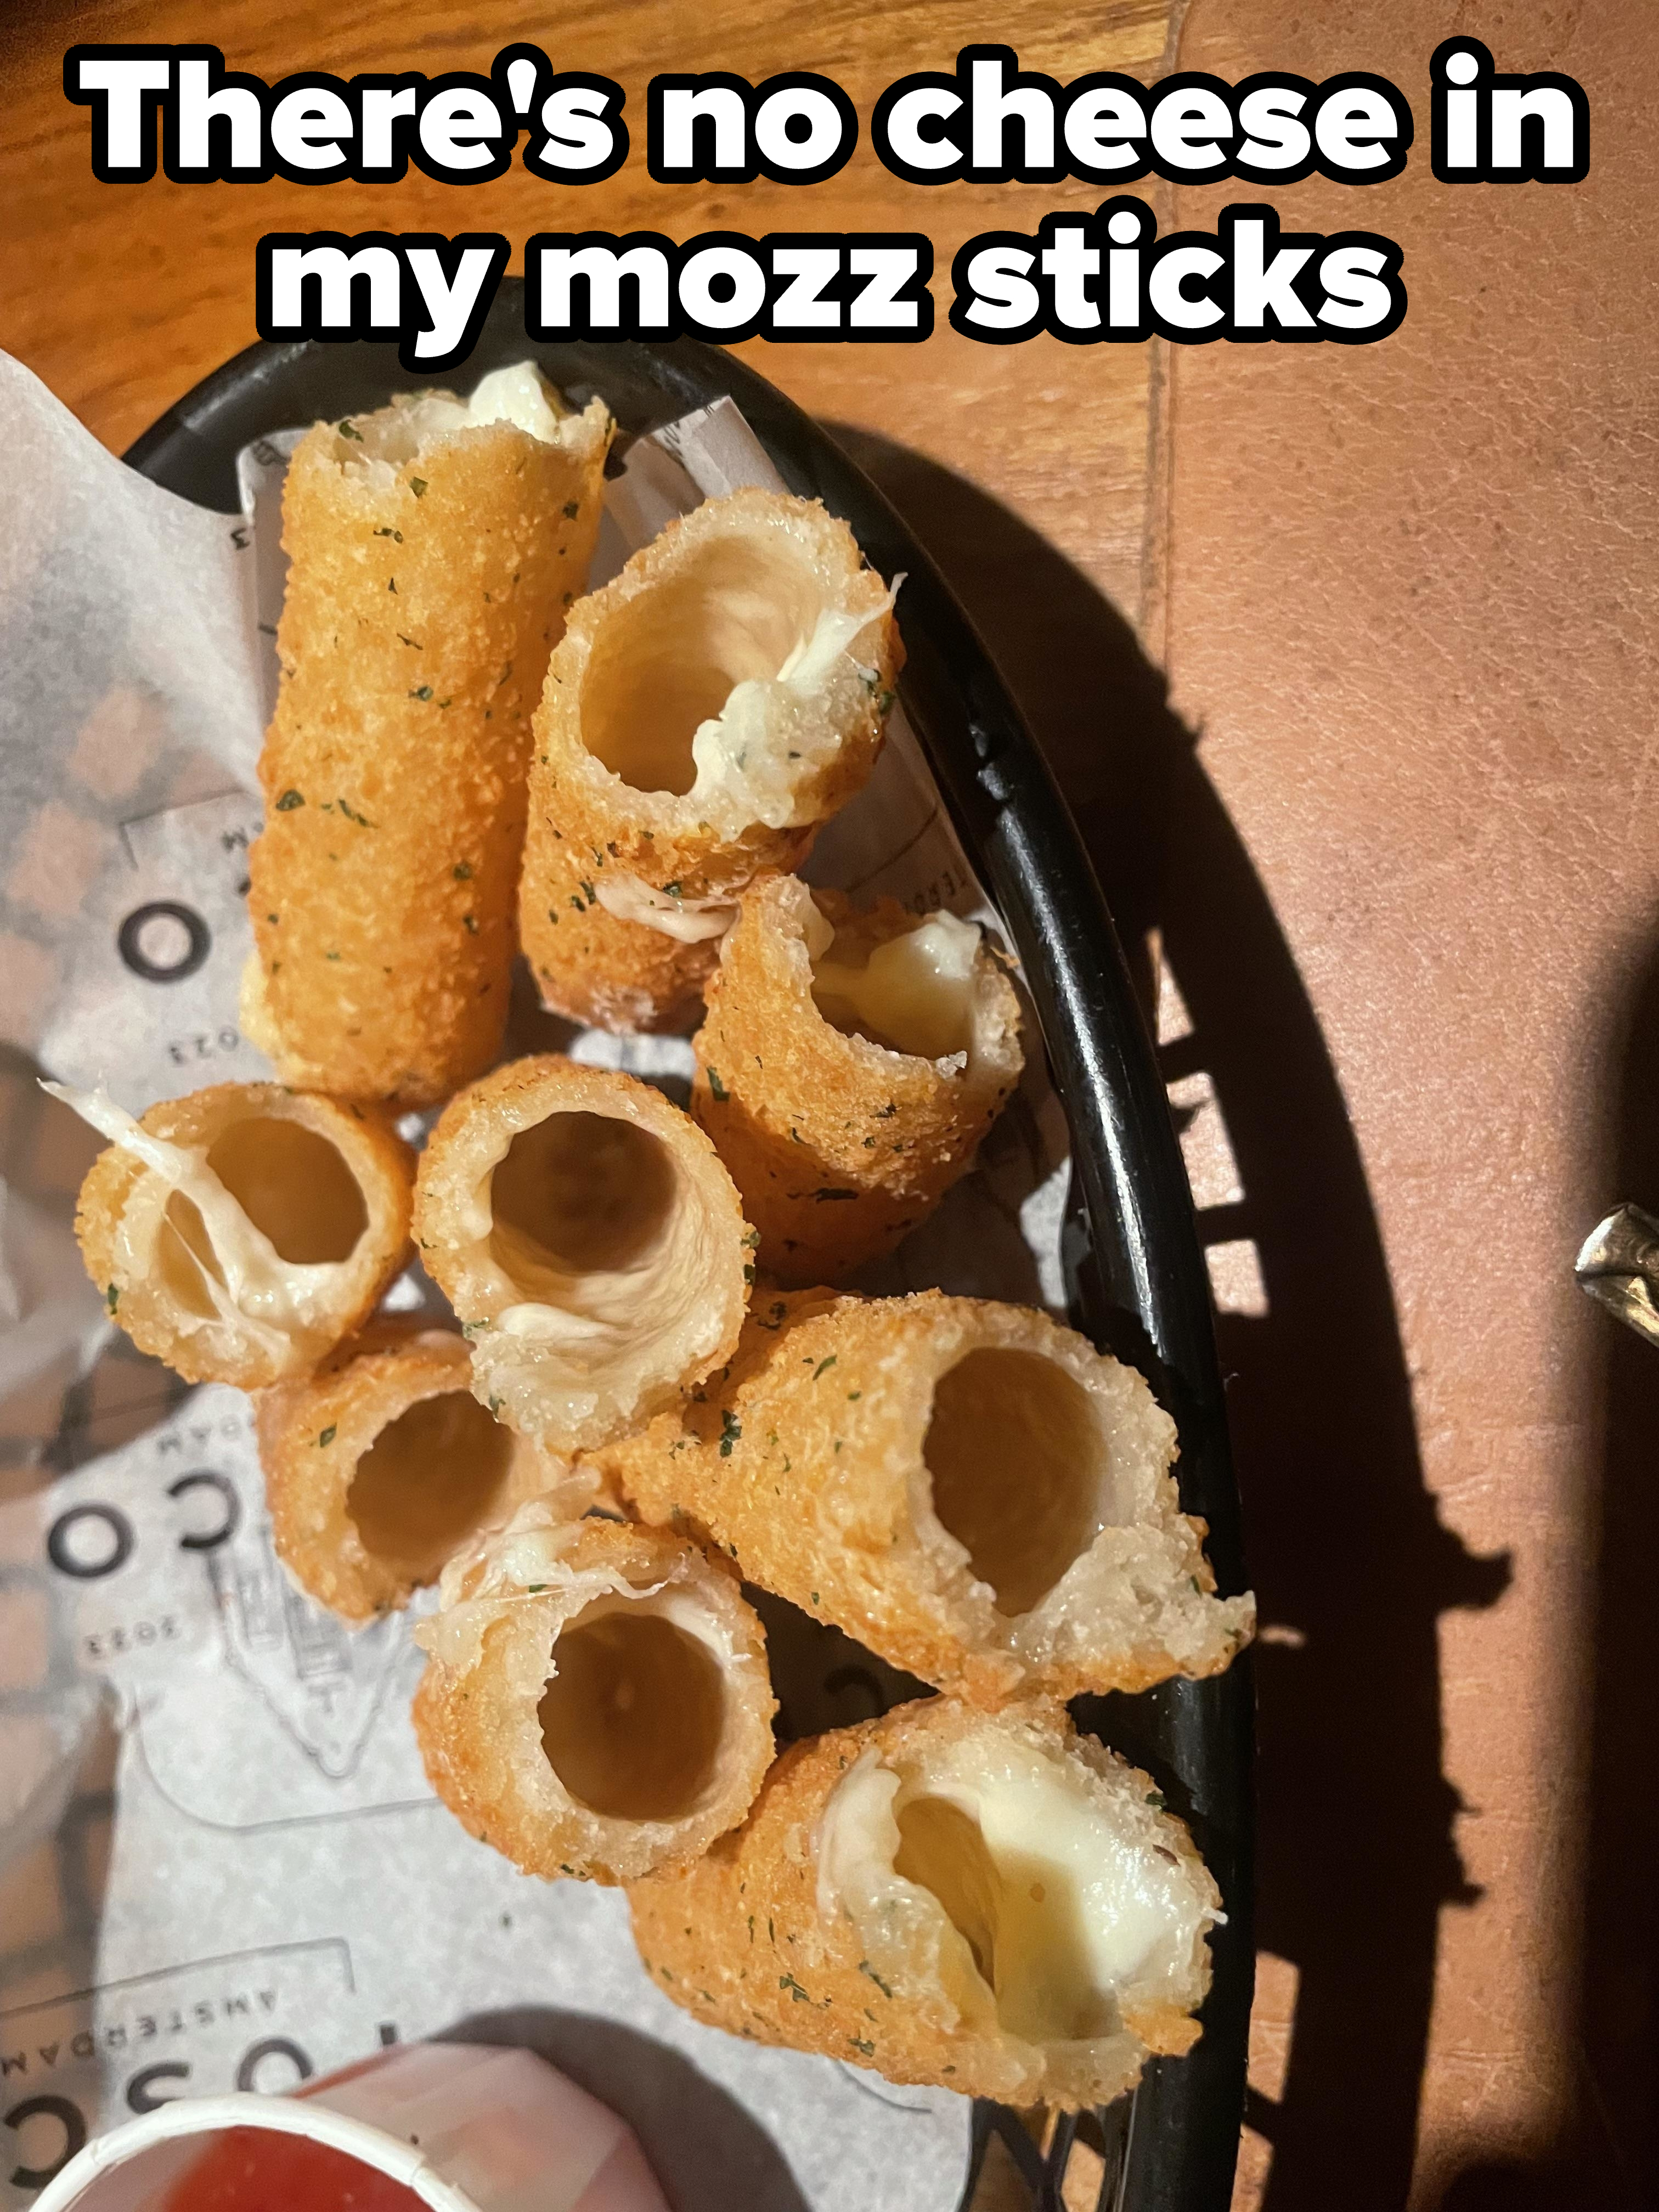 &quot;There&#x27;s no cheese in my mozz sticks.&quot; showing mozzarella sticks with little or no cheese inside